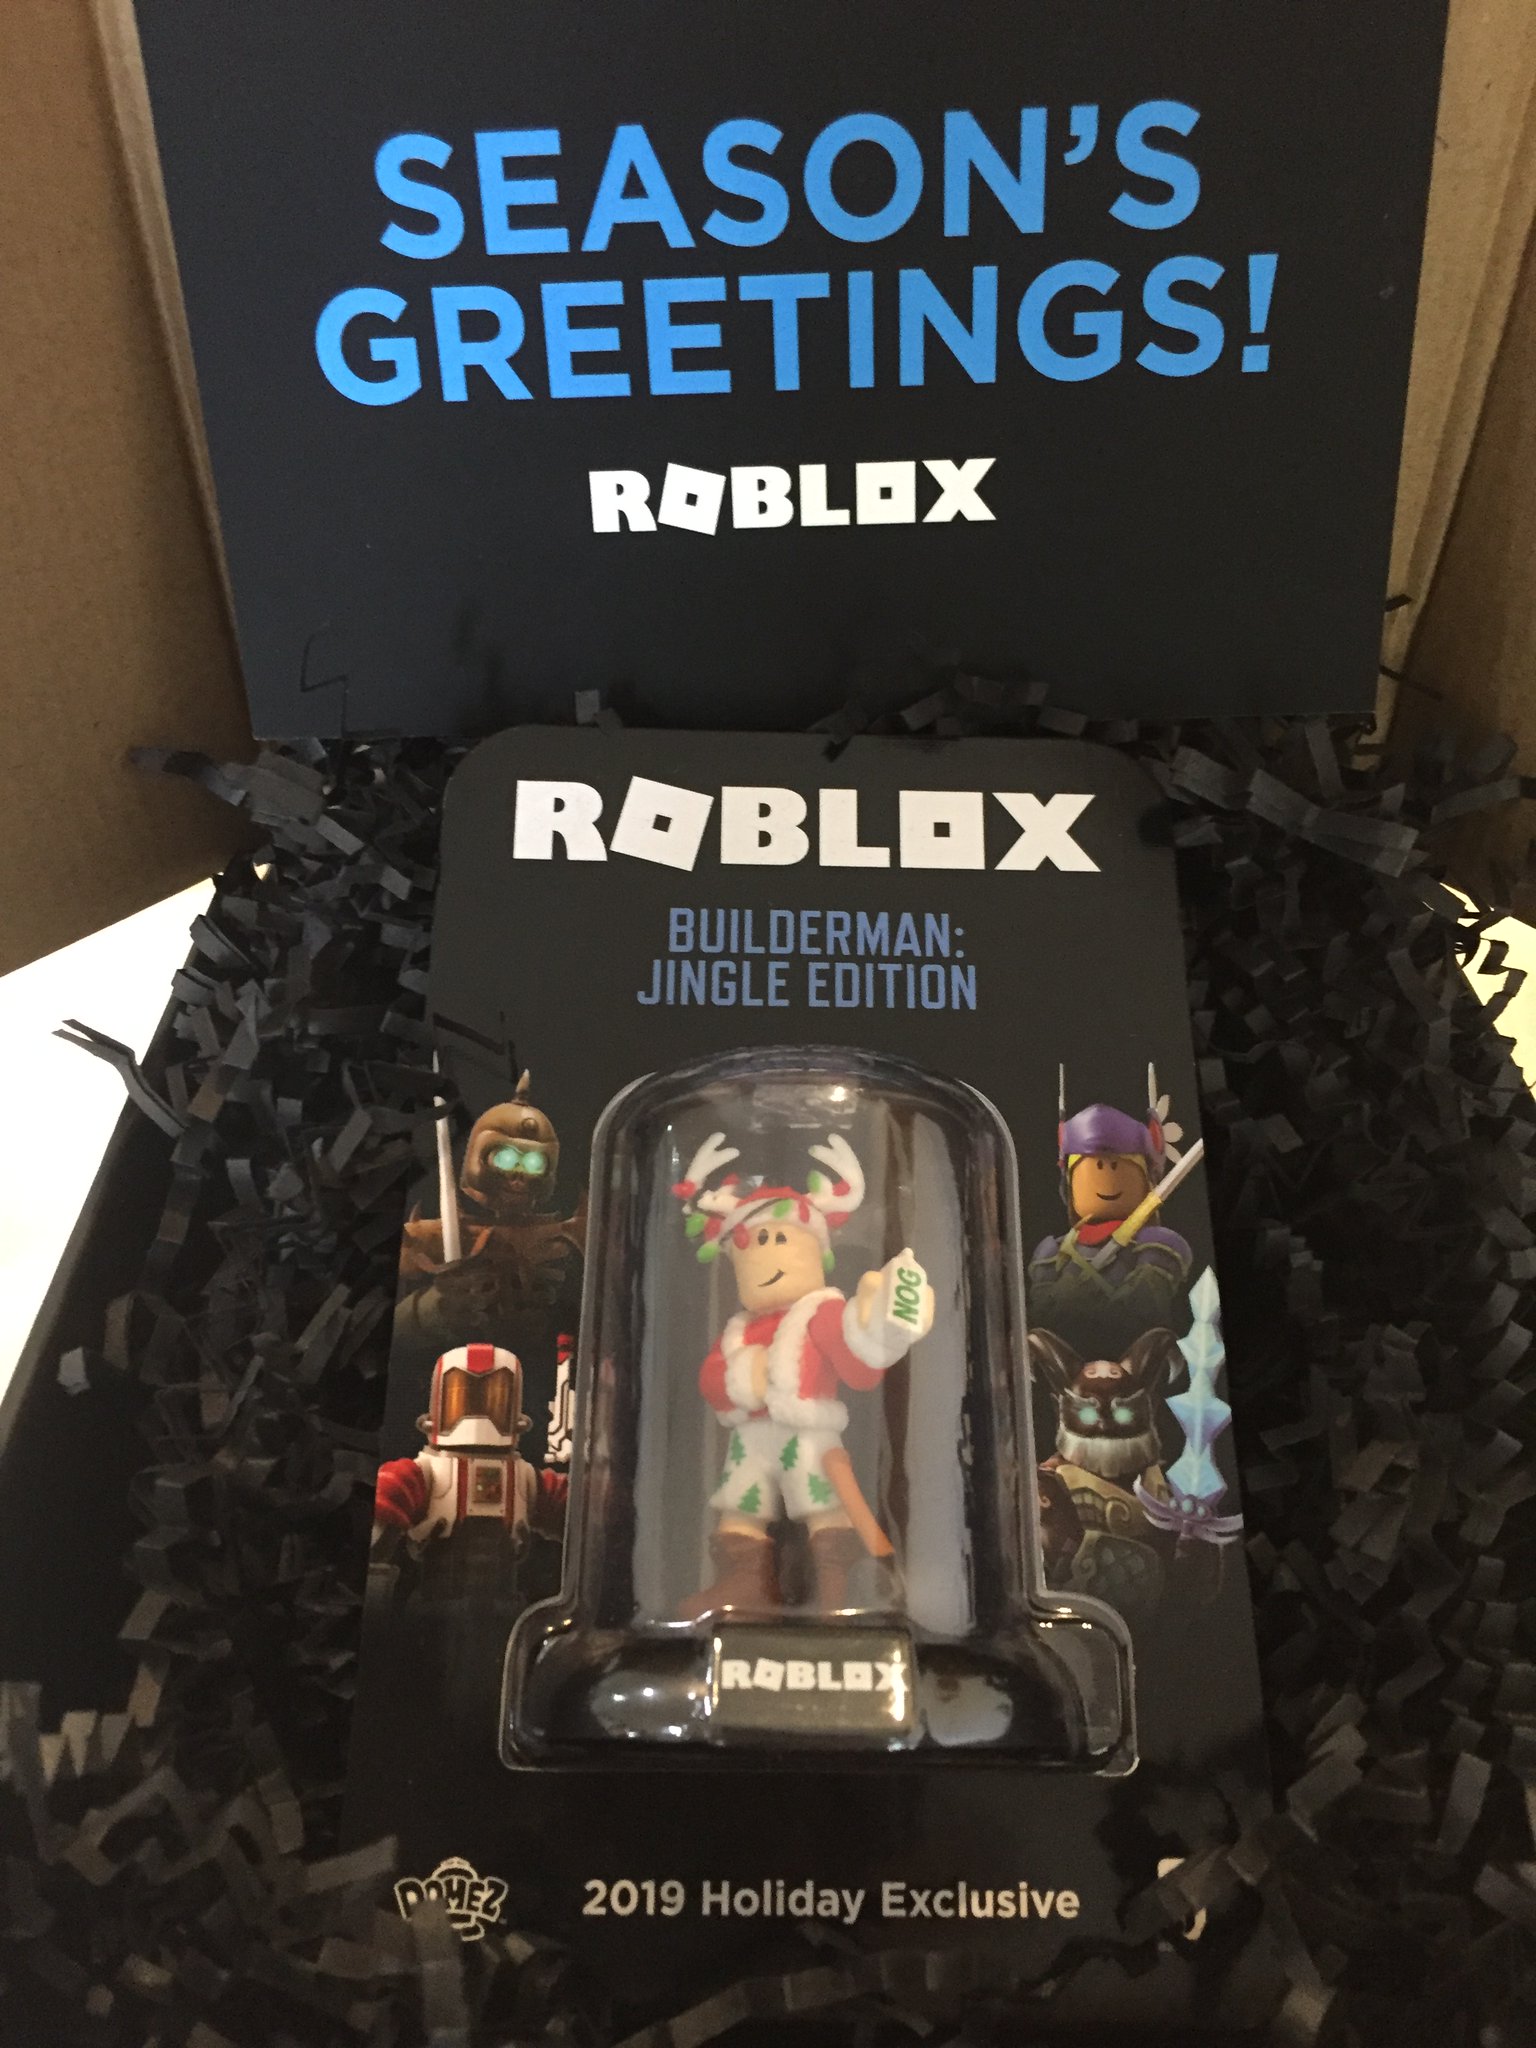 Missmudmaam On Twitter This Guy Builderman Jingle Edition Just Arrived On My Doorstep All The Way Down Under In Australia That Was Quite A Journey Thank You So Much Roblox - builderman roblox password 2019